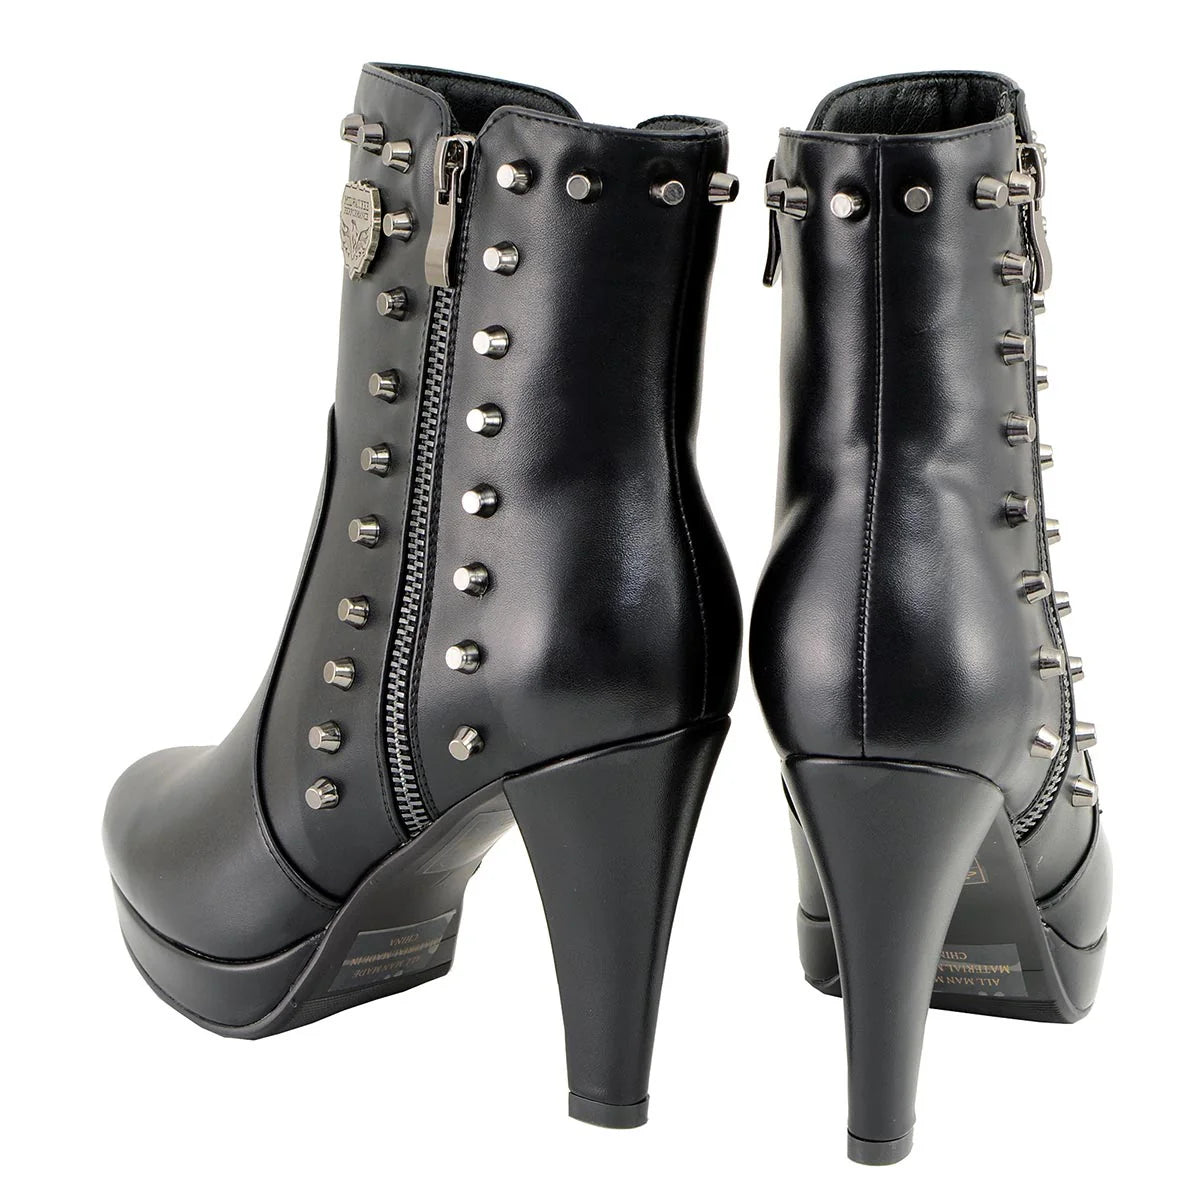 Women's Black Spiked Fashion Boots with Side Zippers